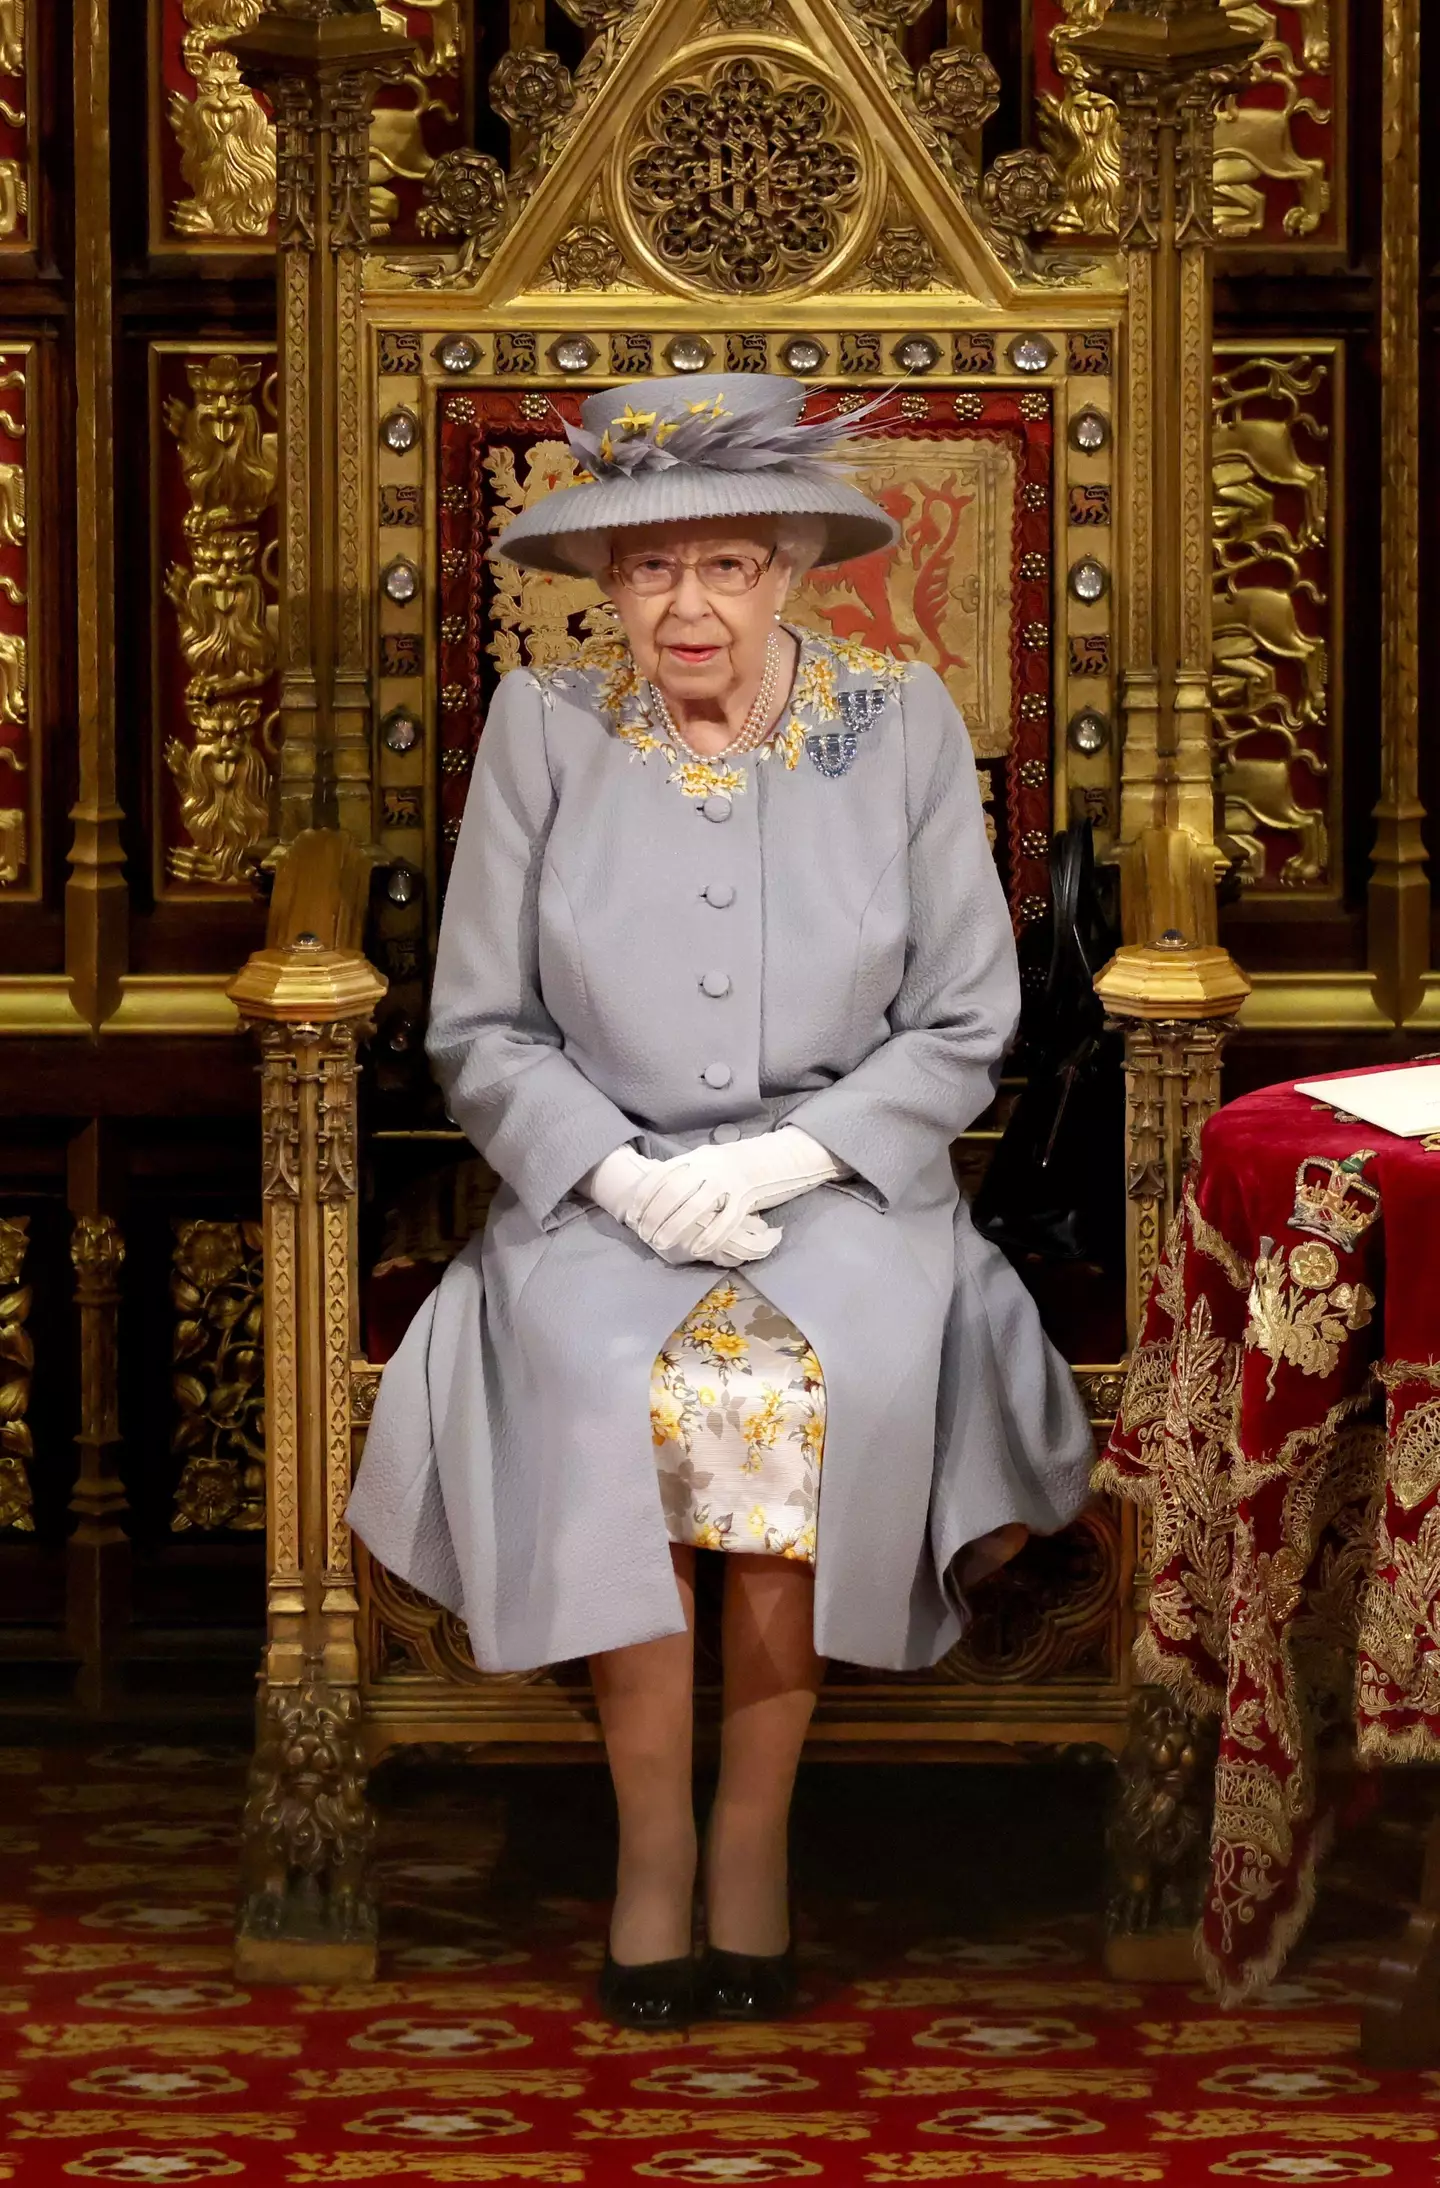 The Queen has had to pull out of several events in recent months. (